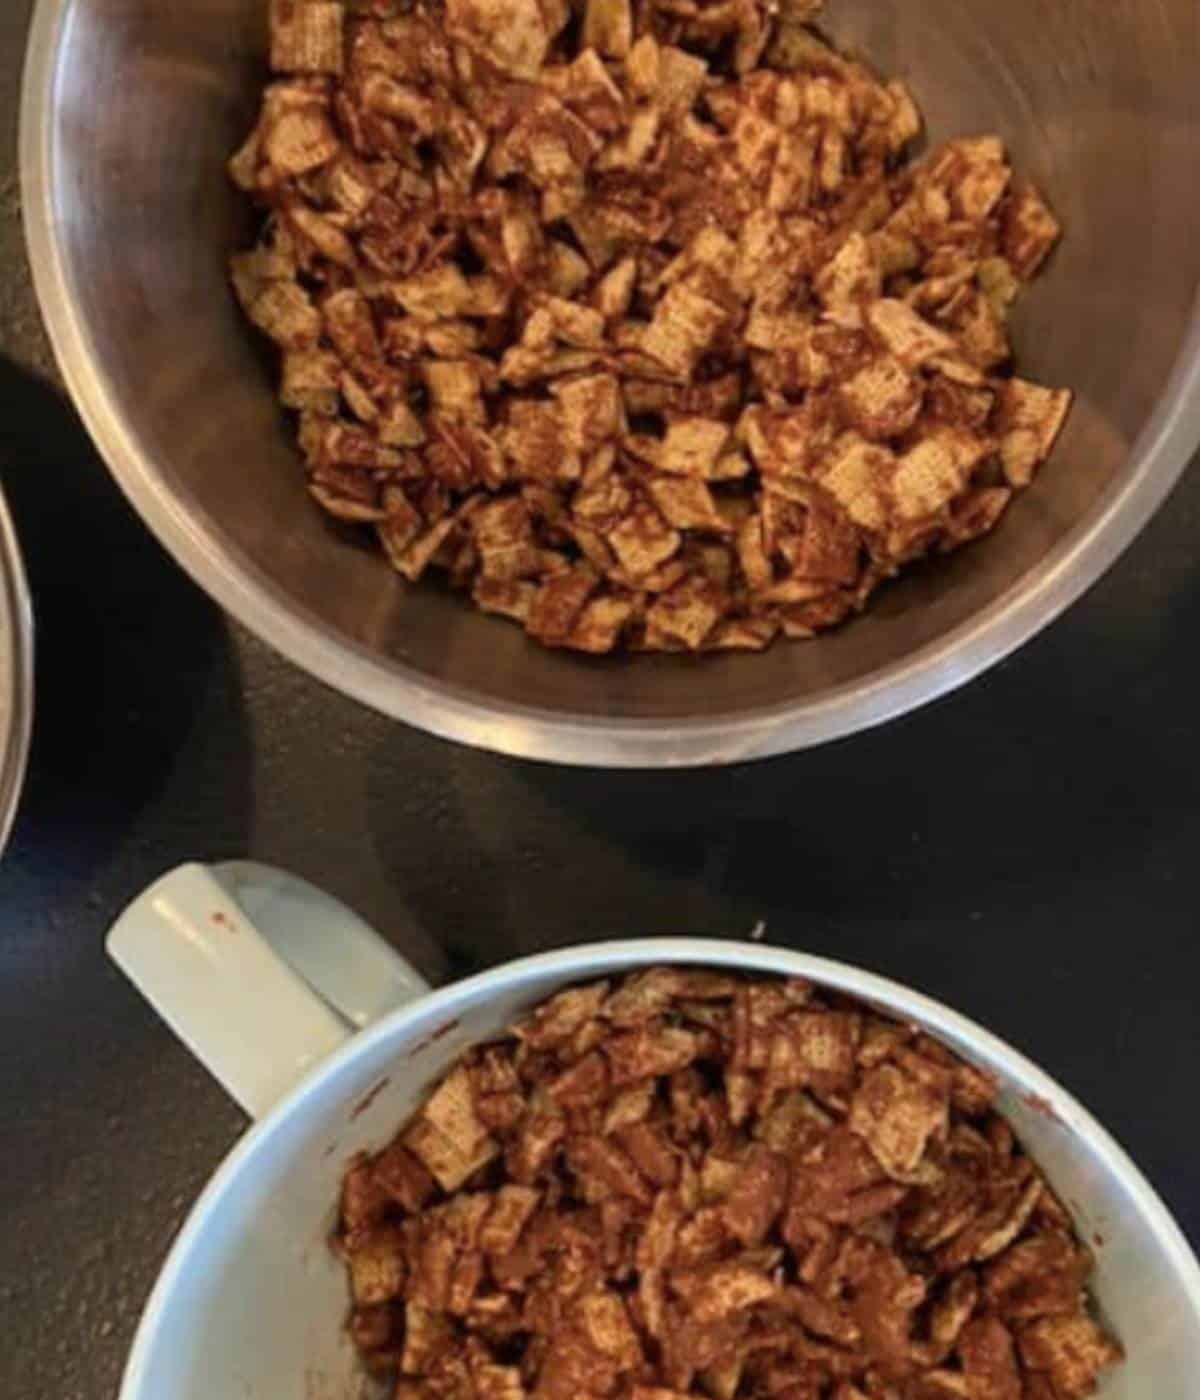 Chex separated into two bowls with chocolate.